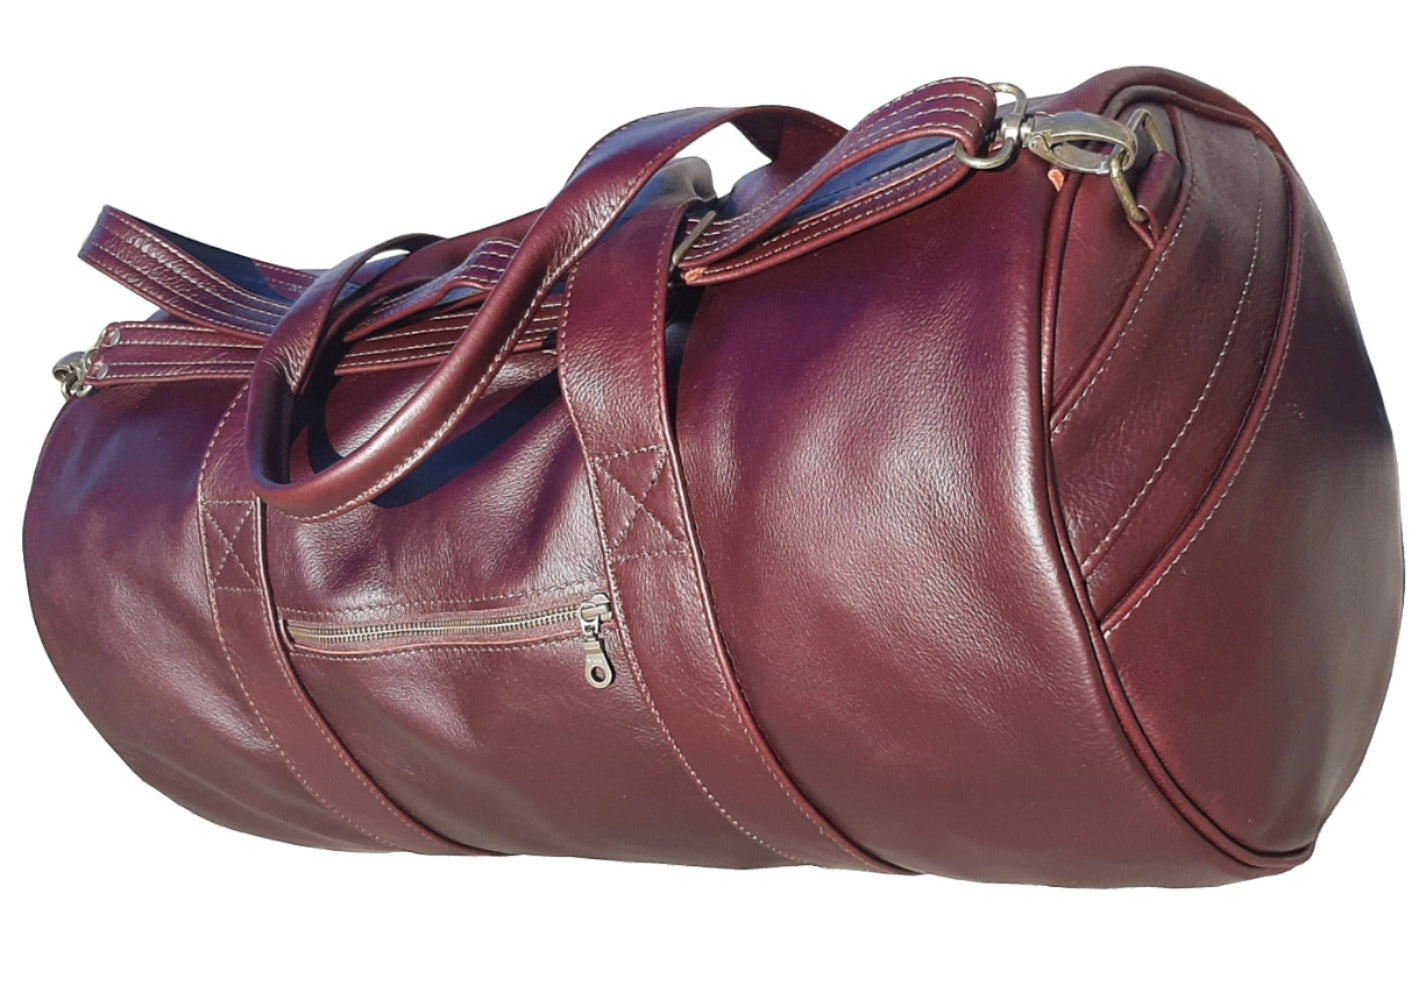 Duffle  travel  bags dark tan from Cape Masai Leather standing on the ground 